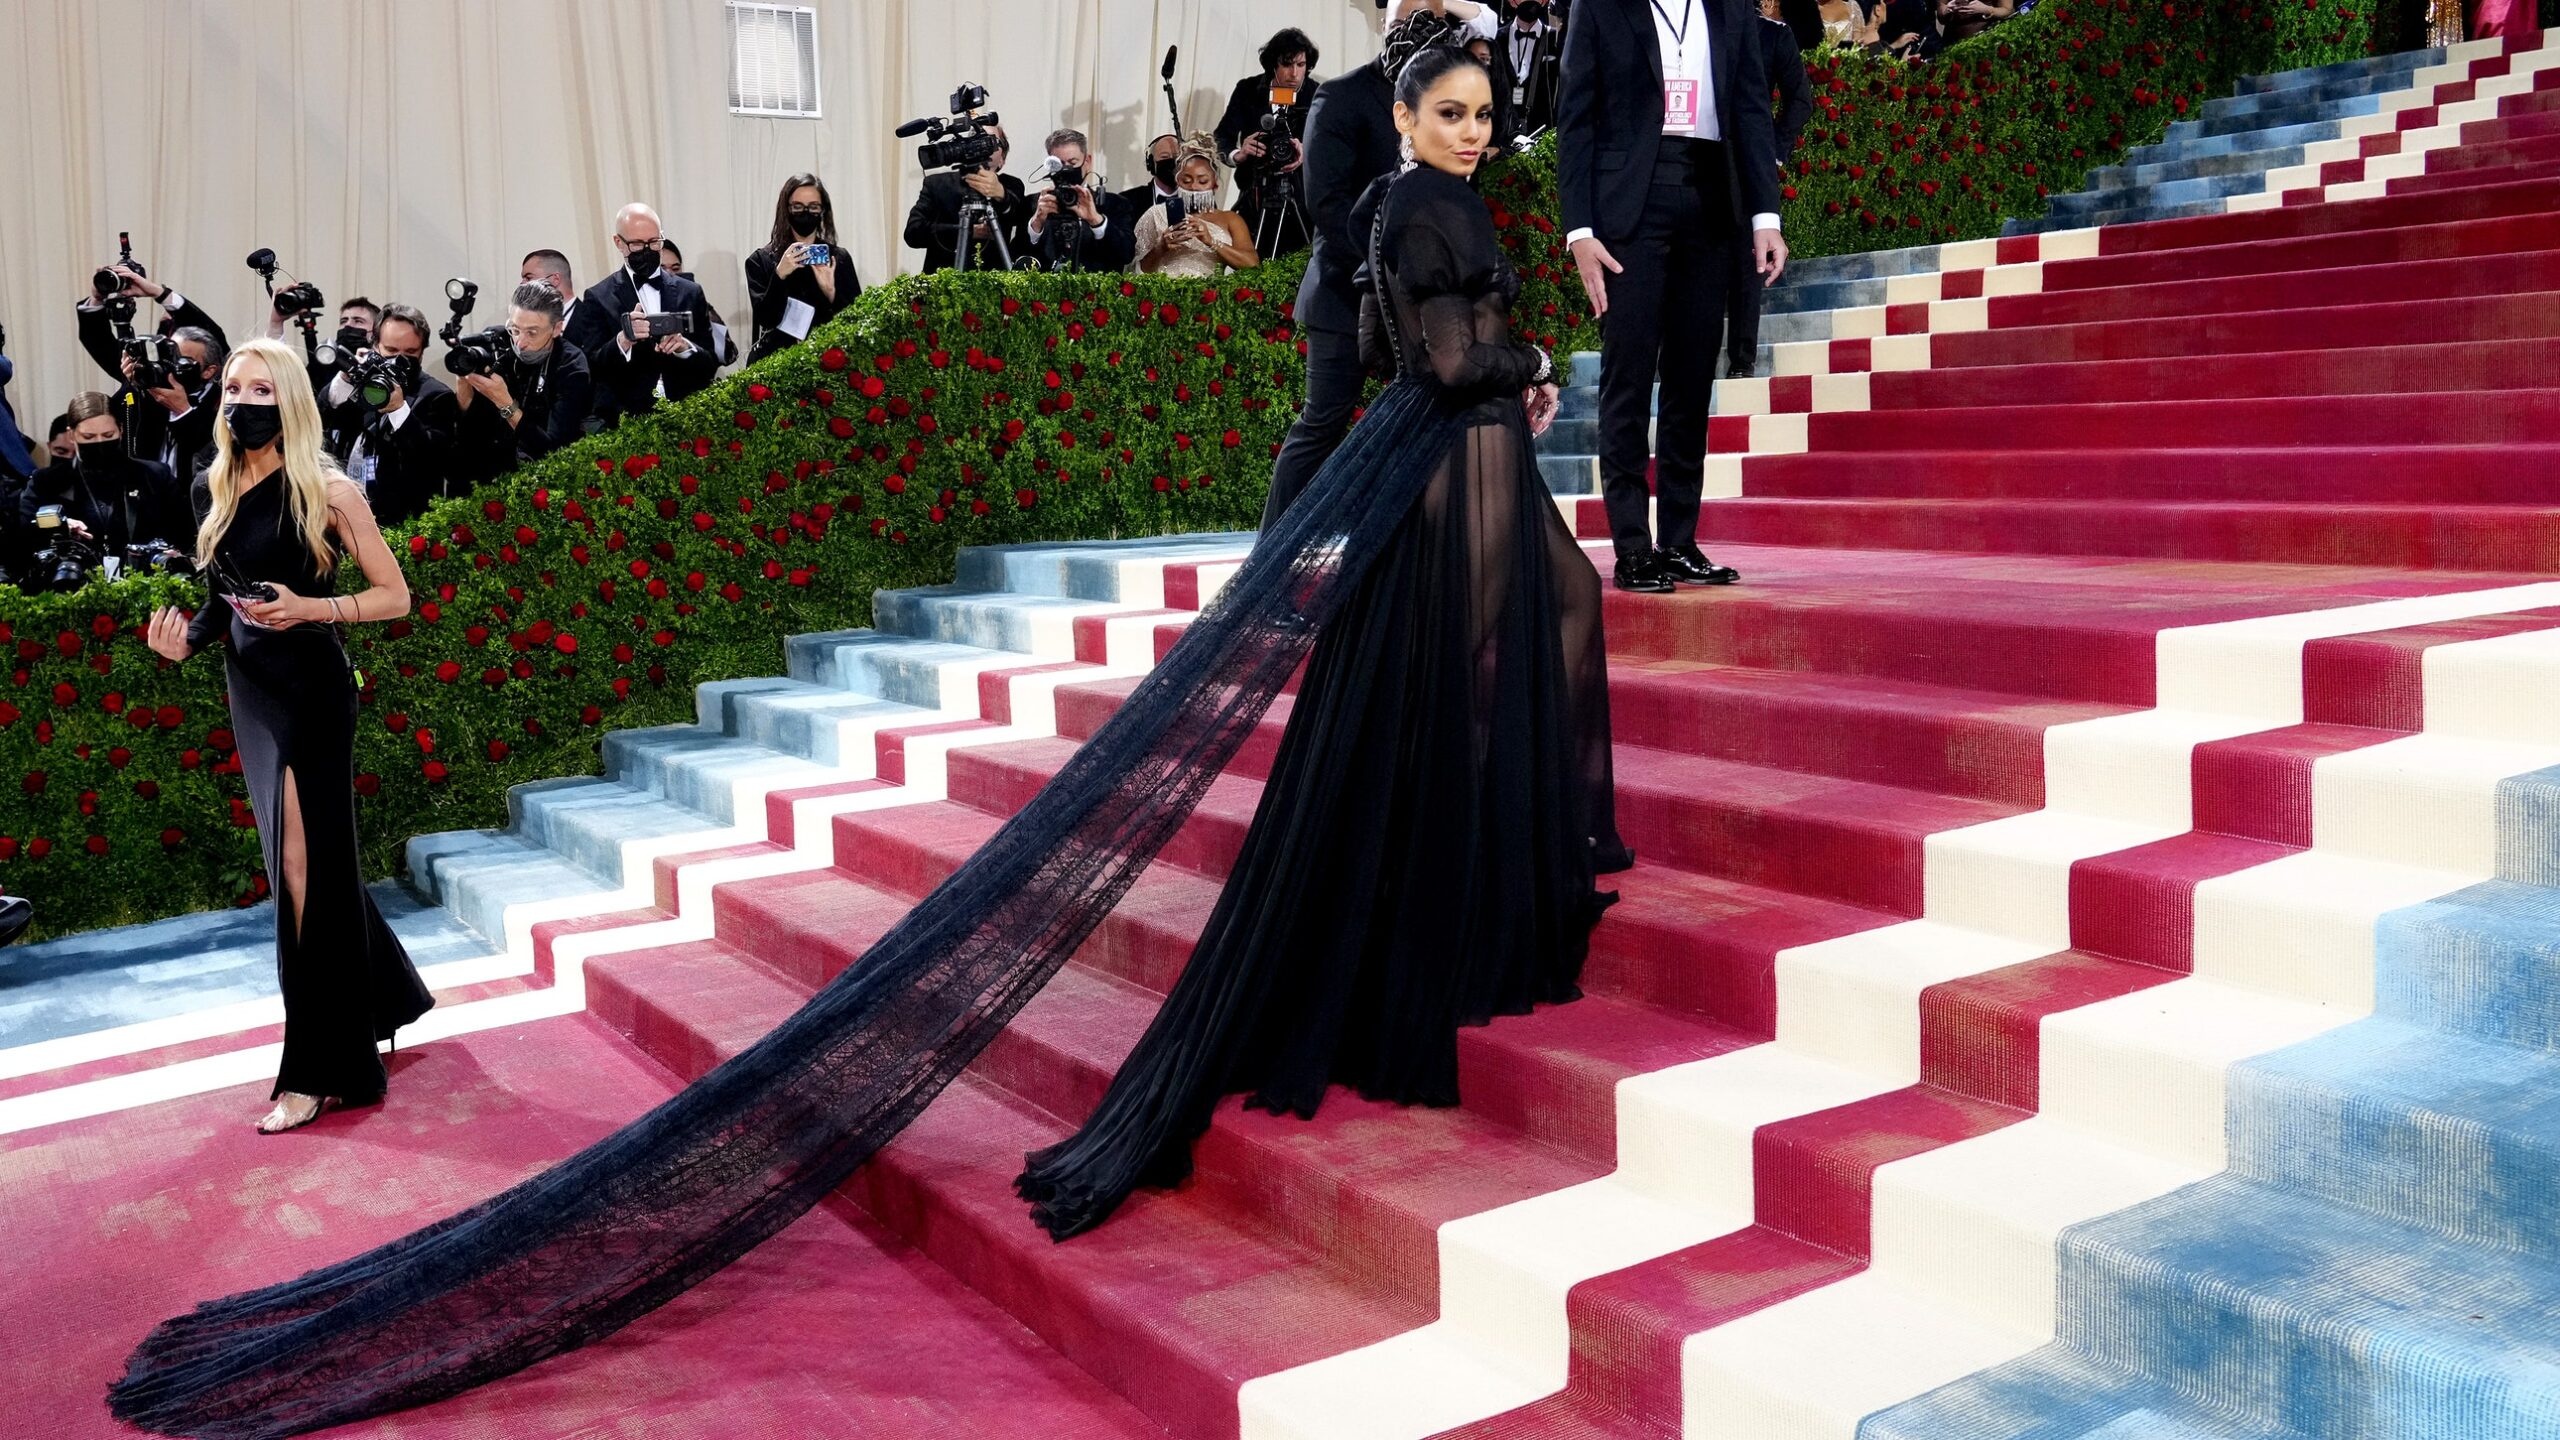 Met Gala 2022, Red carpet fashion, Vote for outfits, 2560x1440 HD Desktop